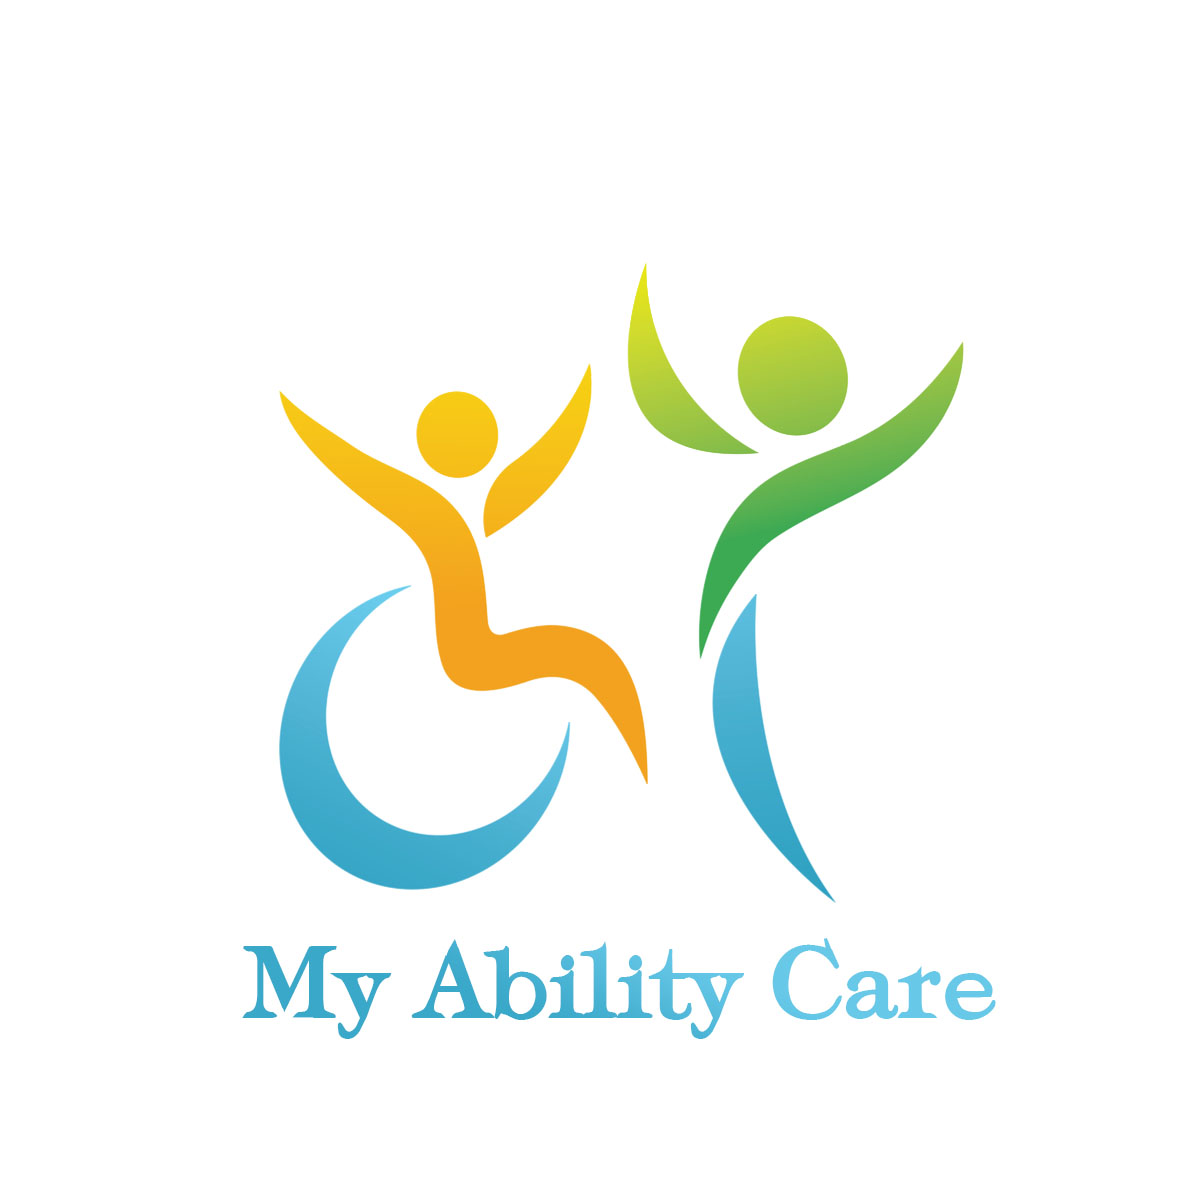 My Ability Care